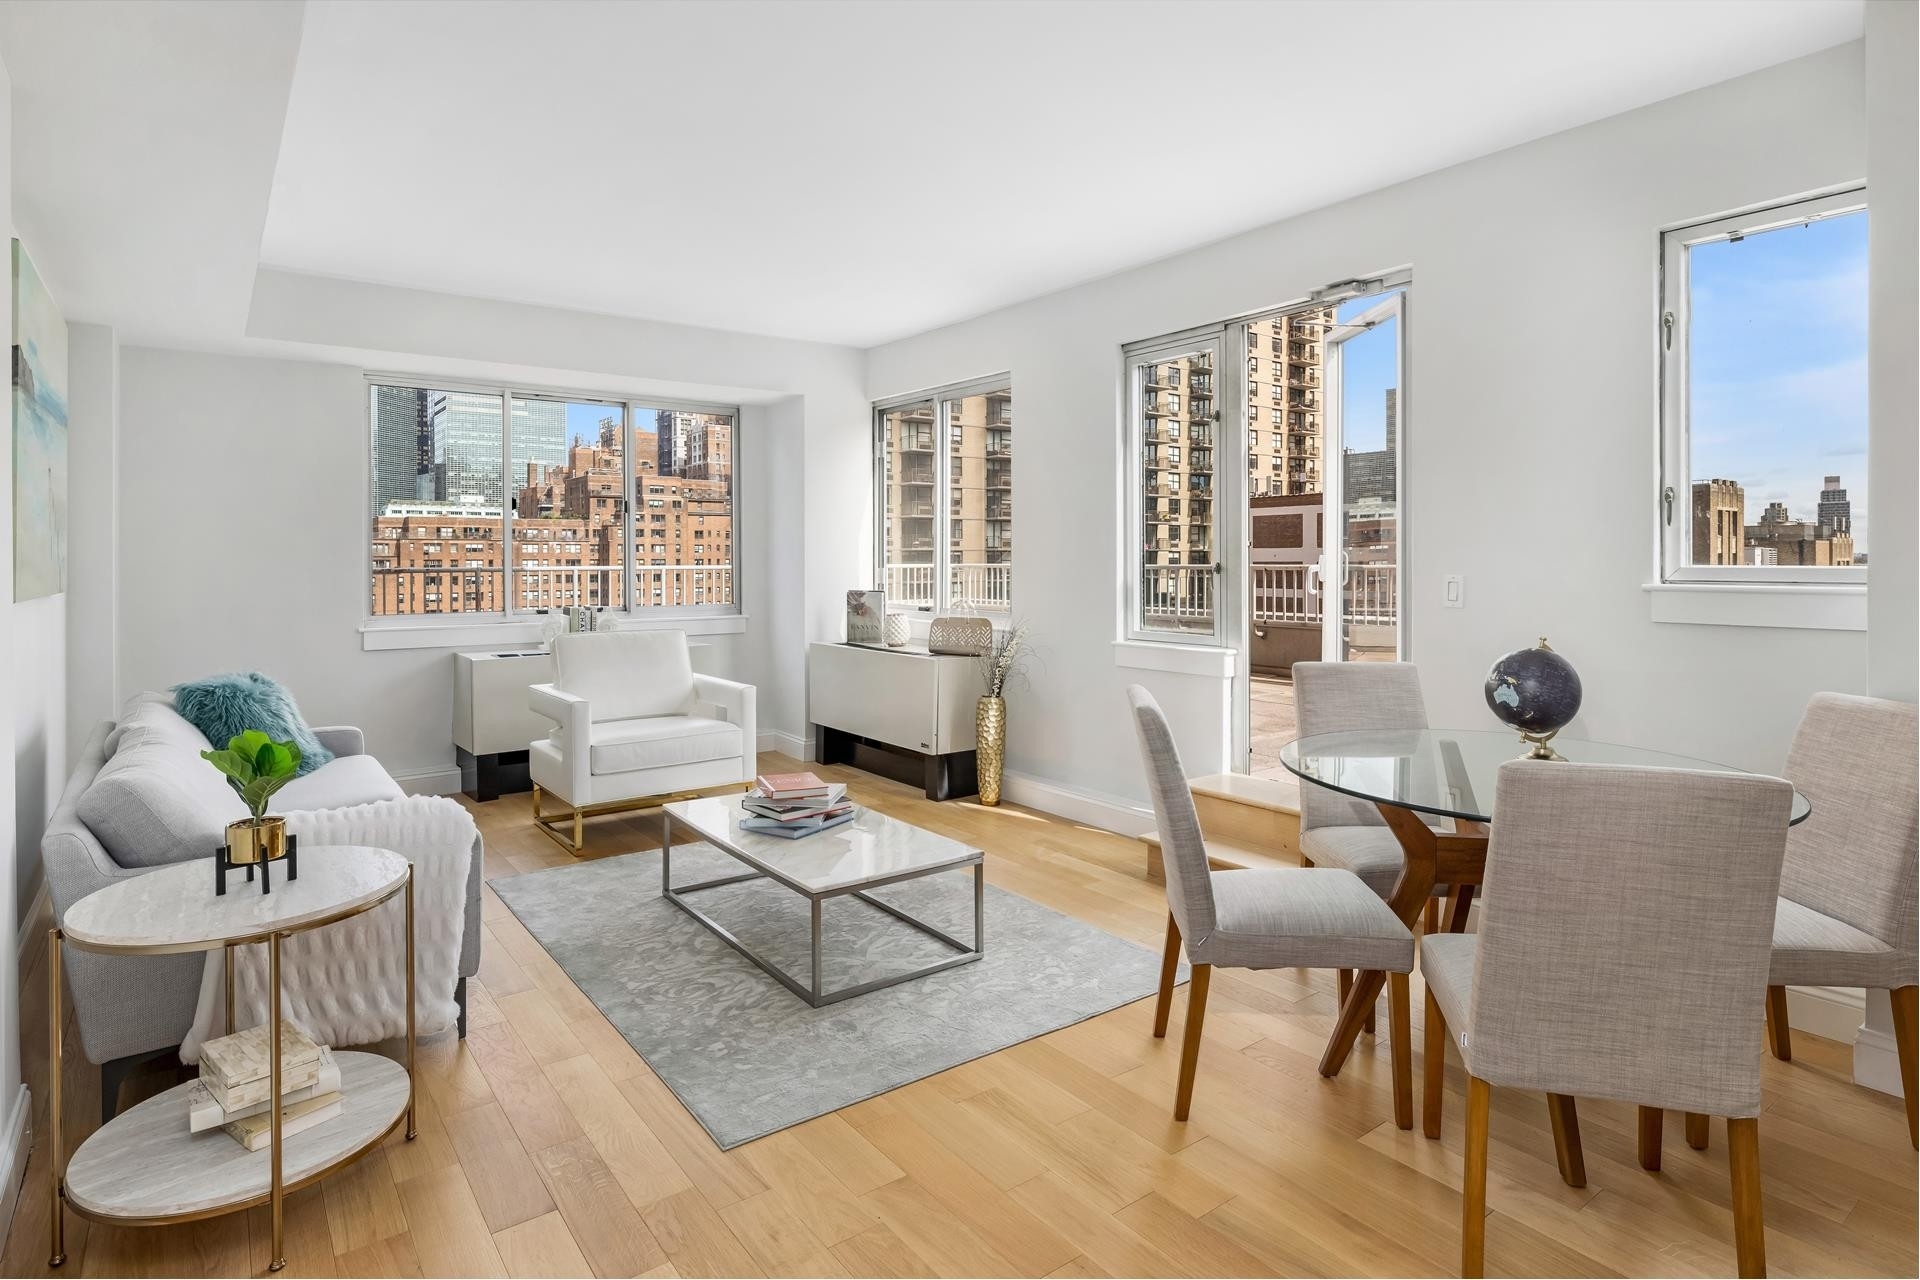 Condominium for Sale at The Vantage, 308 E 38TH ST, 17/18C Murray Hill, New York, New York 10016